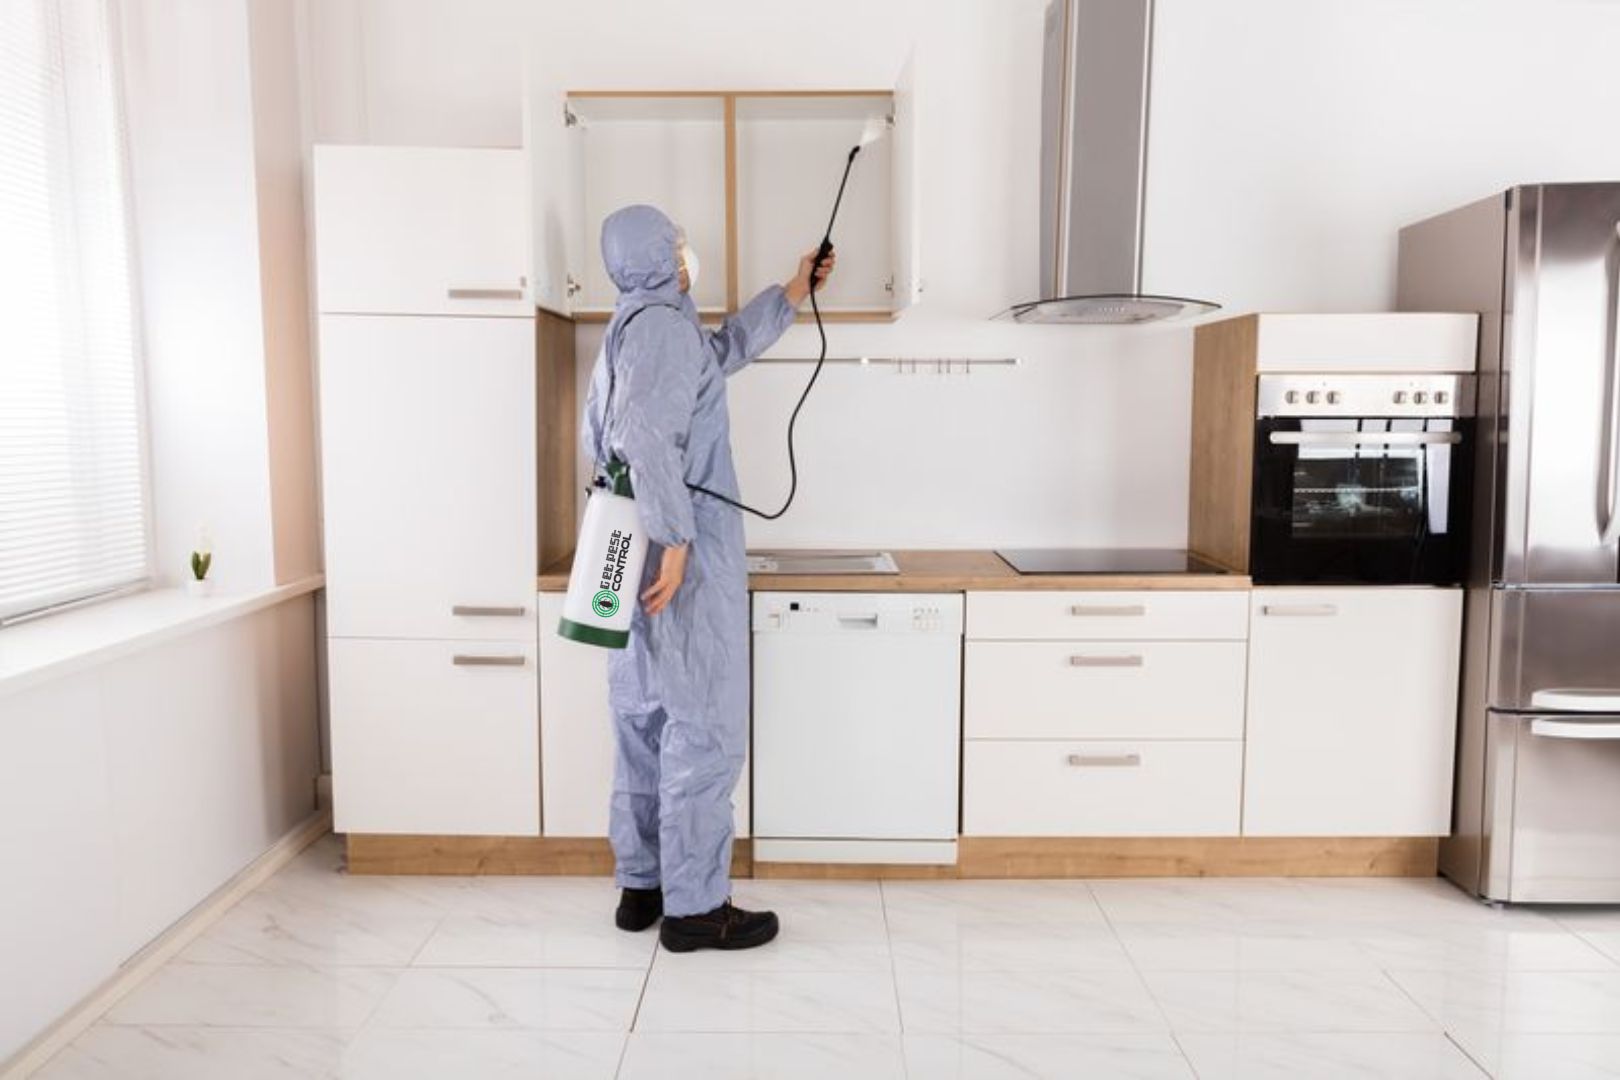 What Are the Benefits of Taking Professional Pest Control Services?